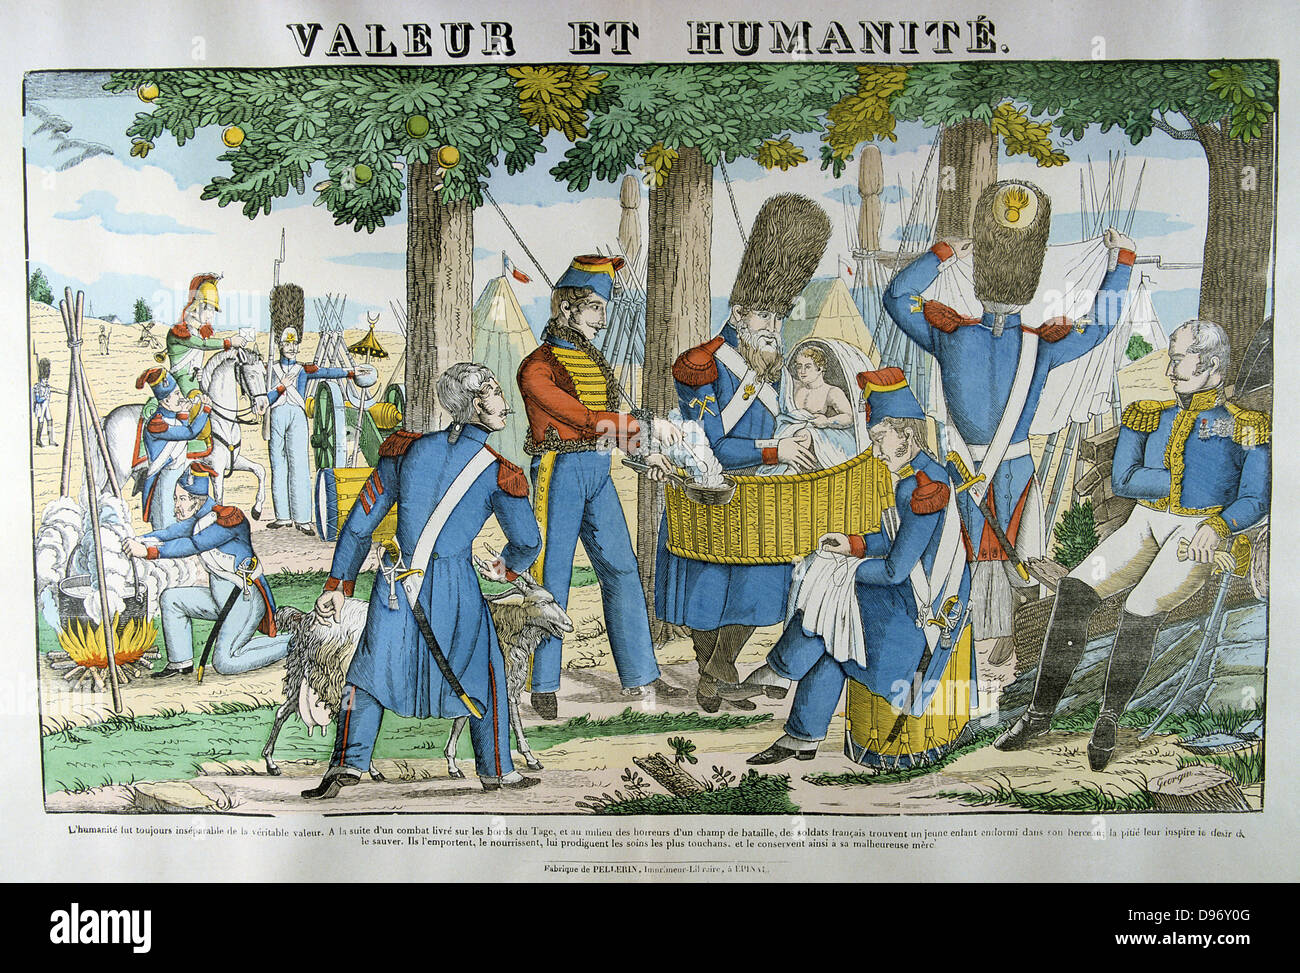 Illustration of an incident during the Peninsular Campaign demonstrating the humanity of French soldiers. Following hostilities on the banks of the Tagus they found a baby asleep in a wicker cradle, rescued it and cared for it. Popular 19th century hand-coloured woodcut. Stock Photo